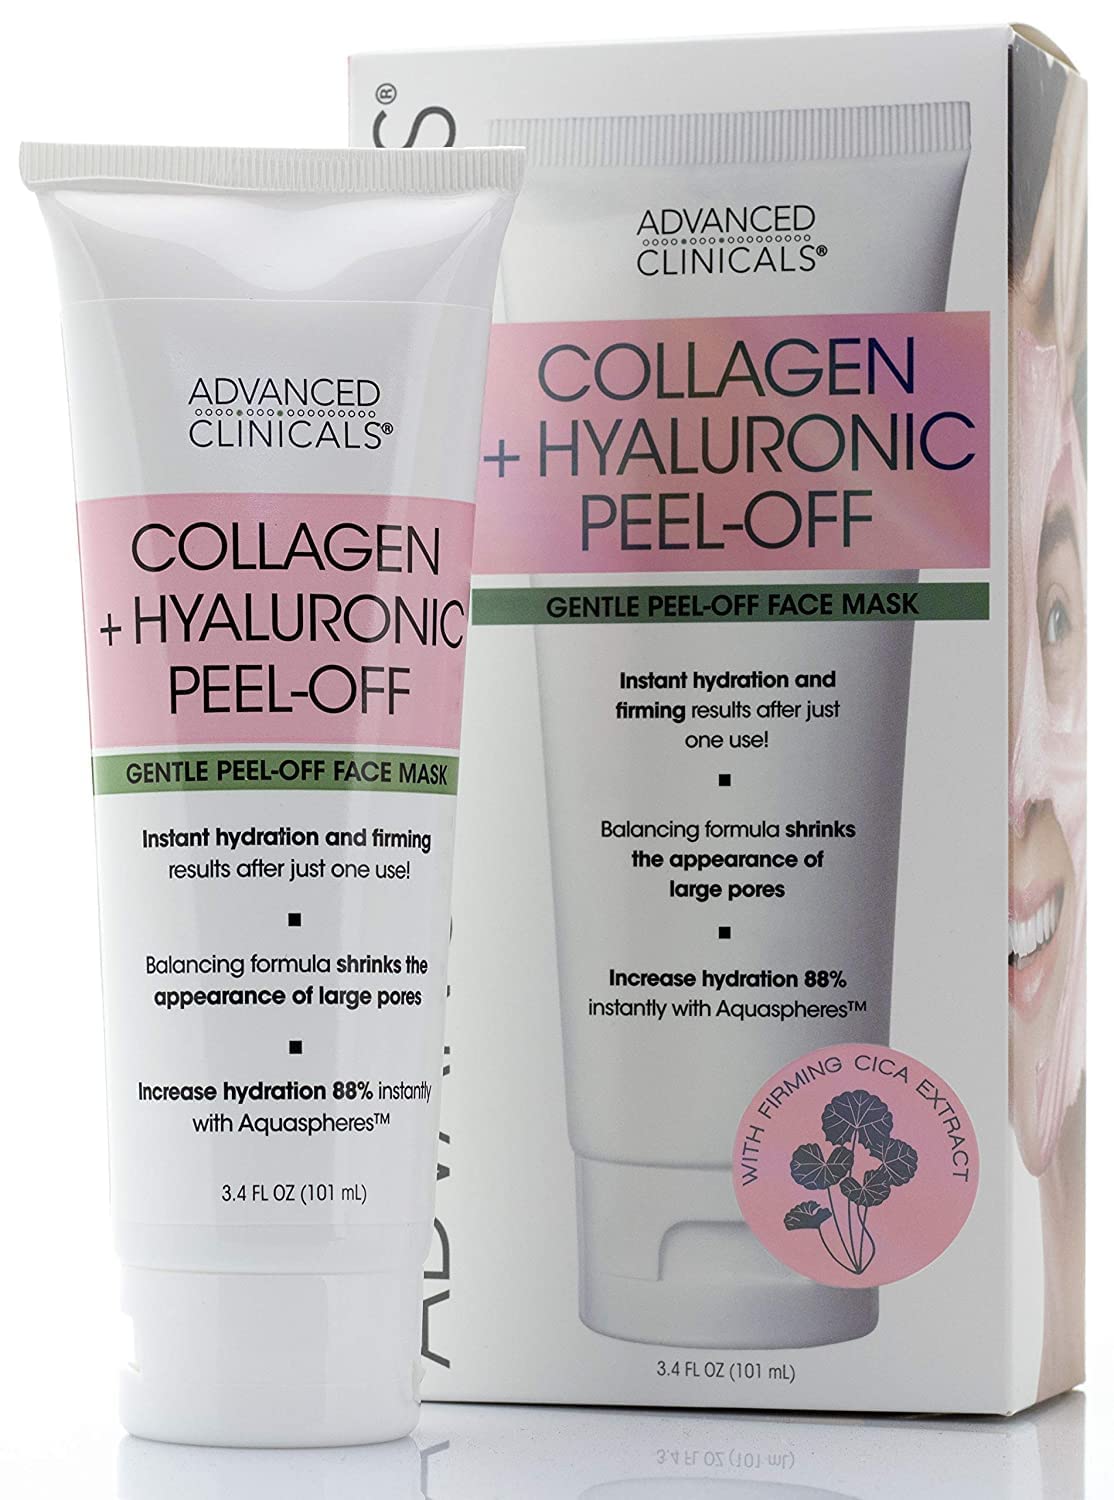 Collagen + Hyaluronic Acid Anti-Aging Peel-Off Face Mask